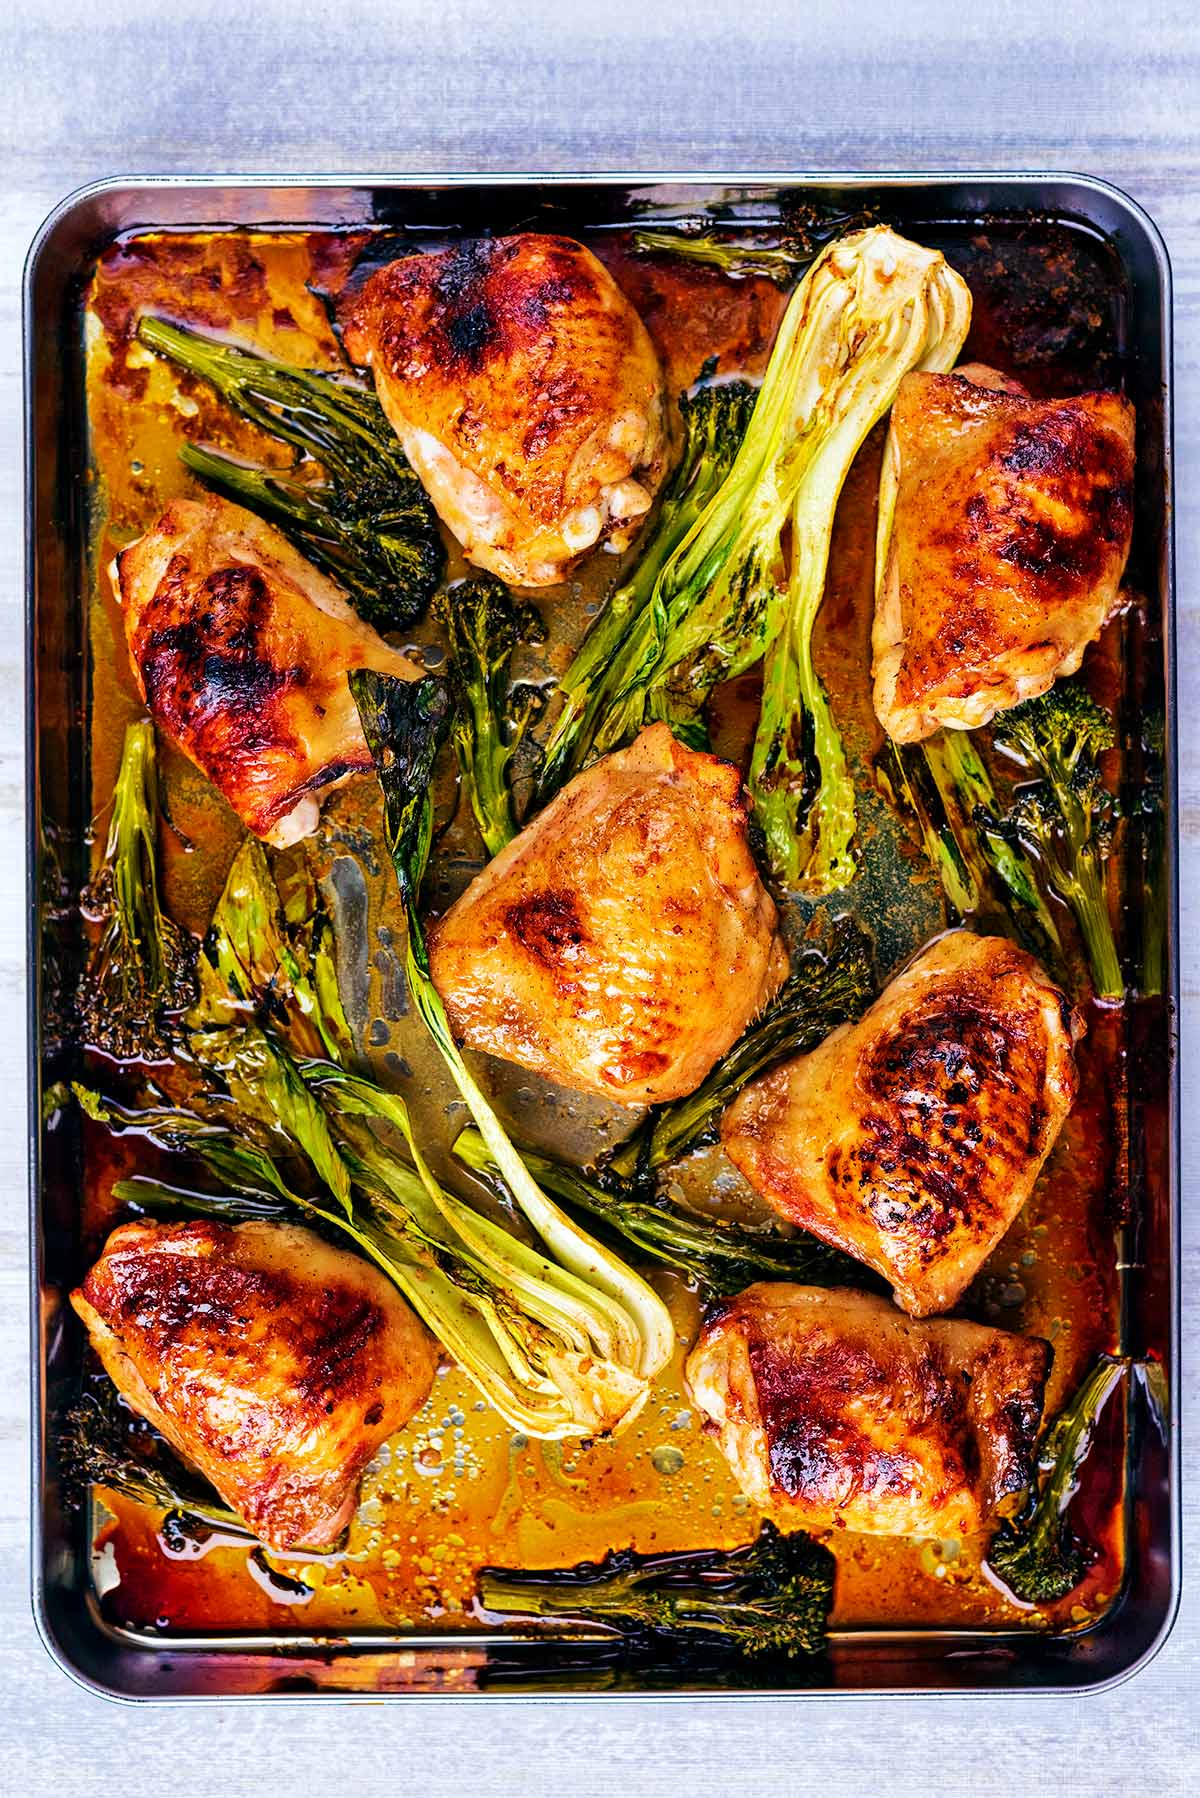 cooked chicken thighs and pak choi on a large baking tray.